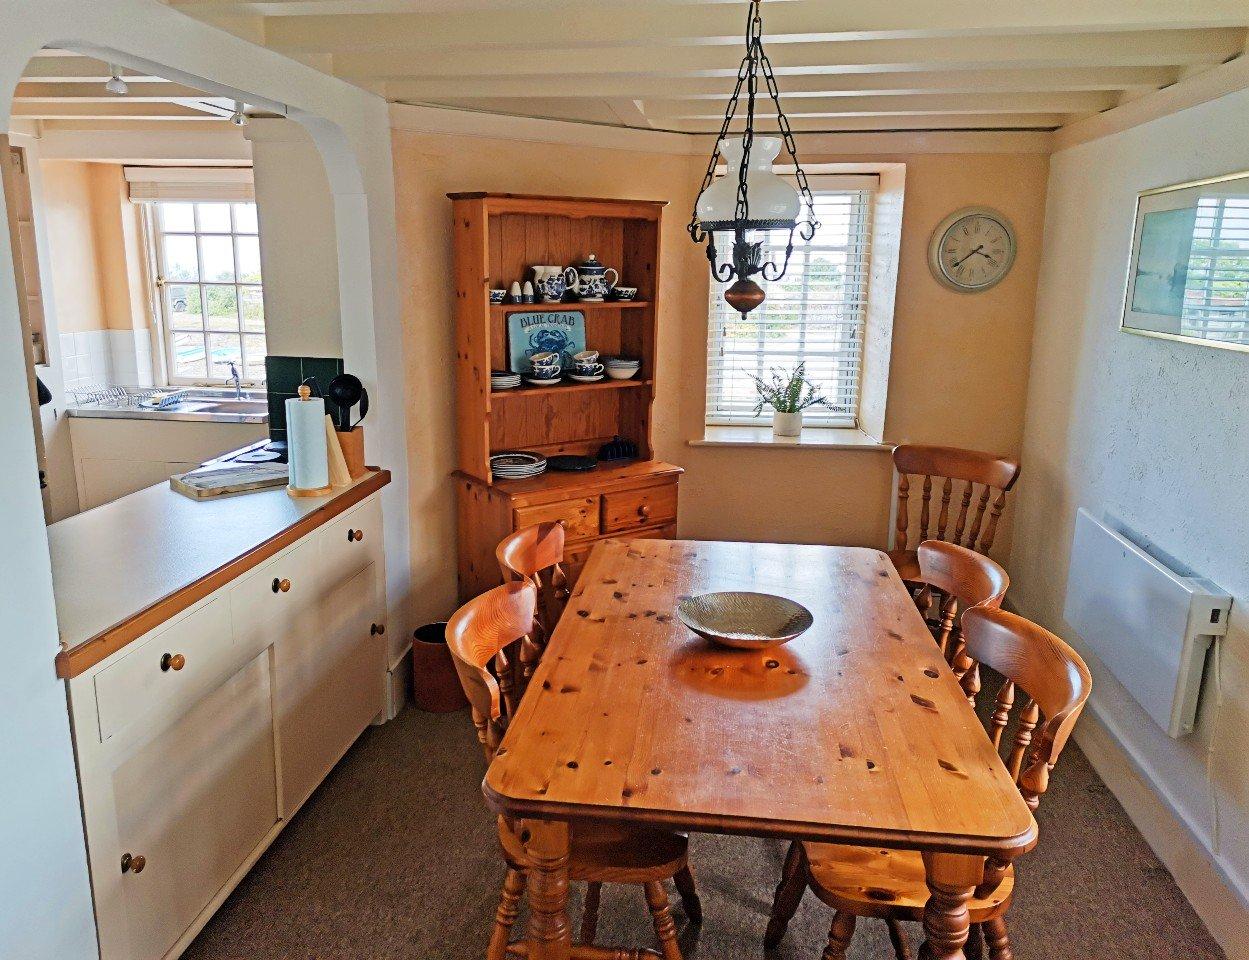 Galley style kitchen and dining area with amazing views.